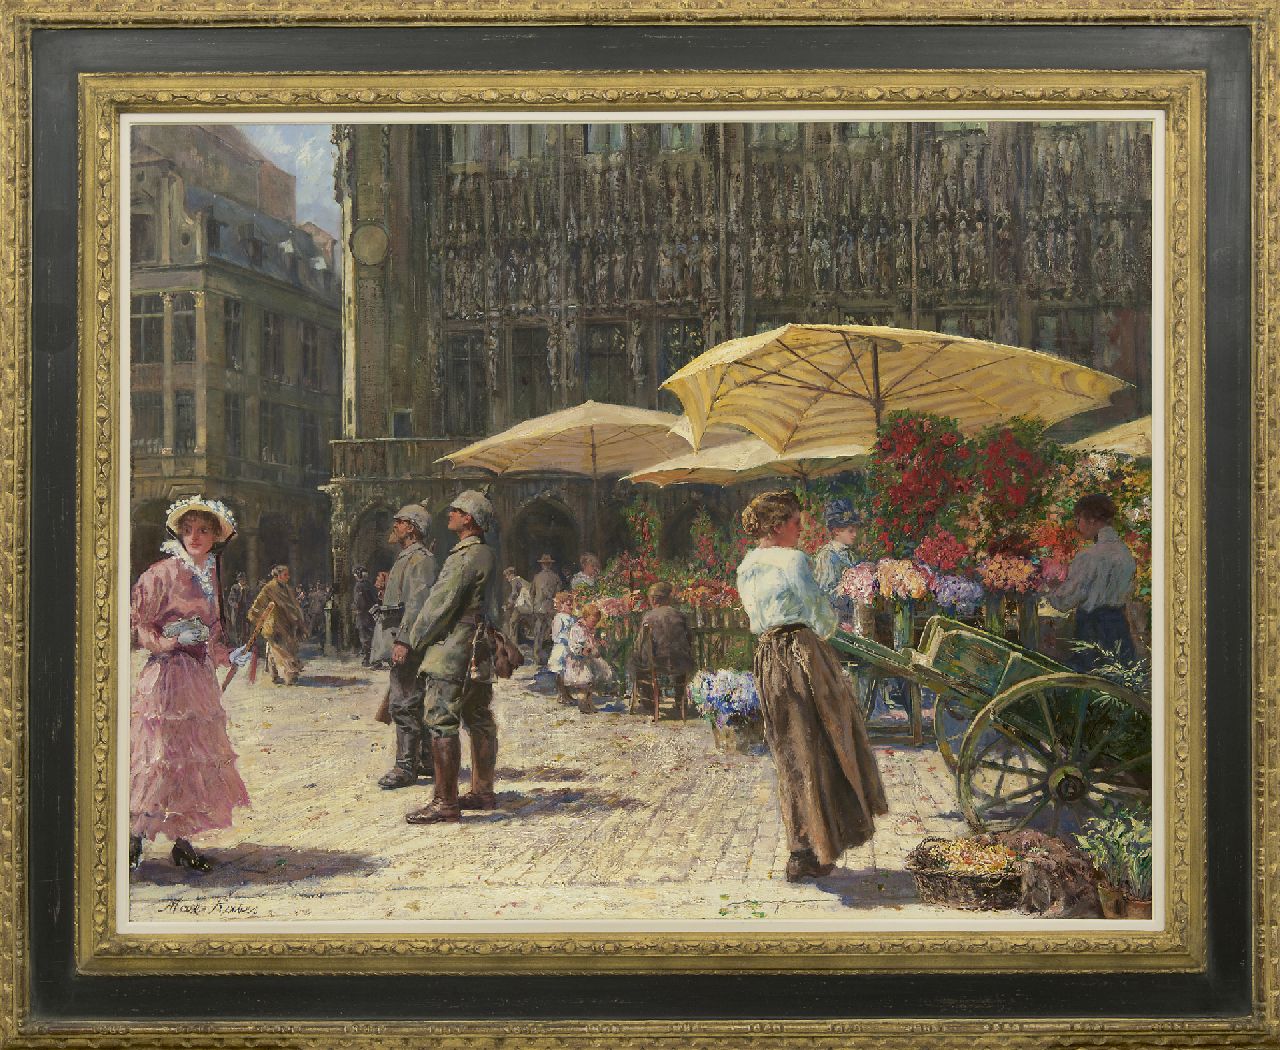 Rabes M.F.F.  | 'Max' Friedrich Ferdinand Rabes, Flower market in Brussels, oil on canvas 80.2 x 100.2 cm, signed l.l.